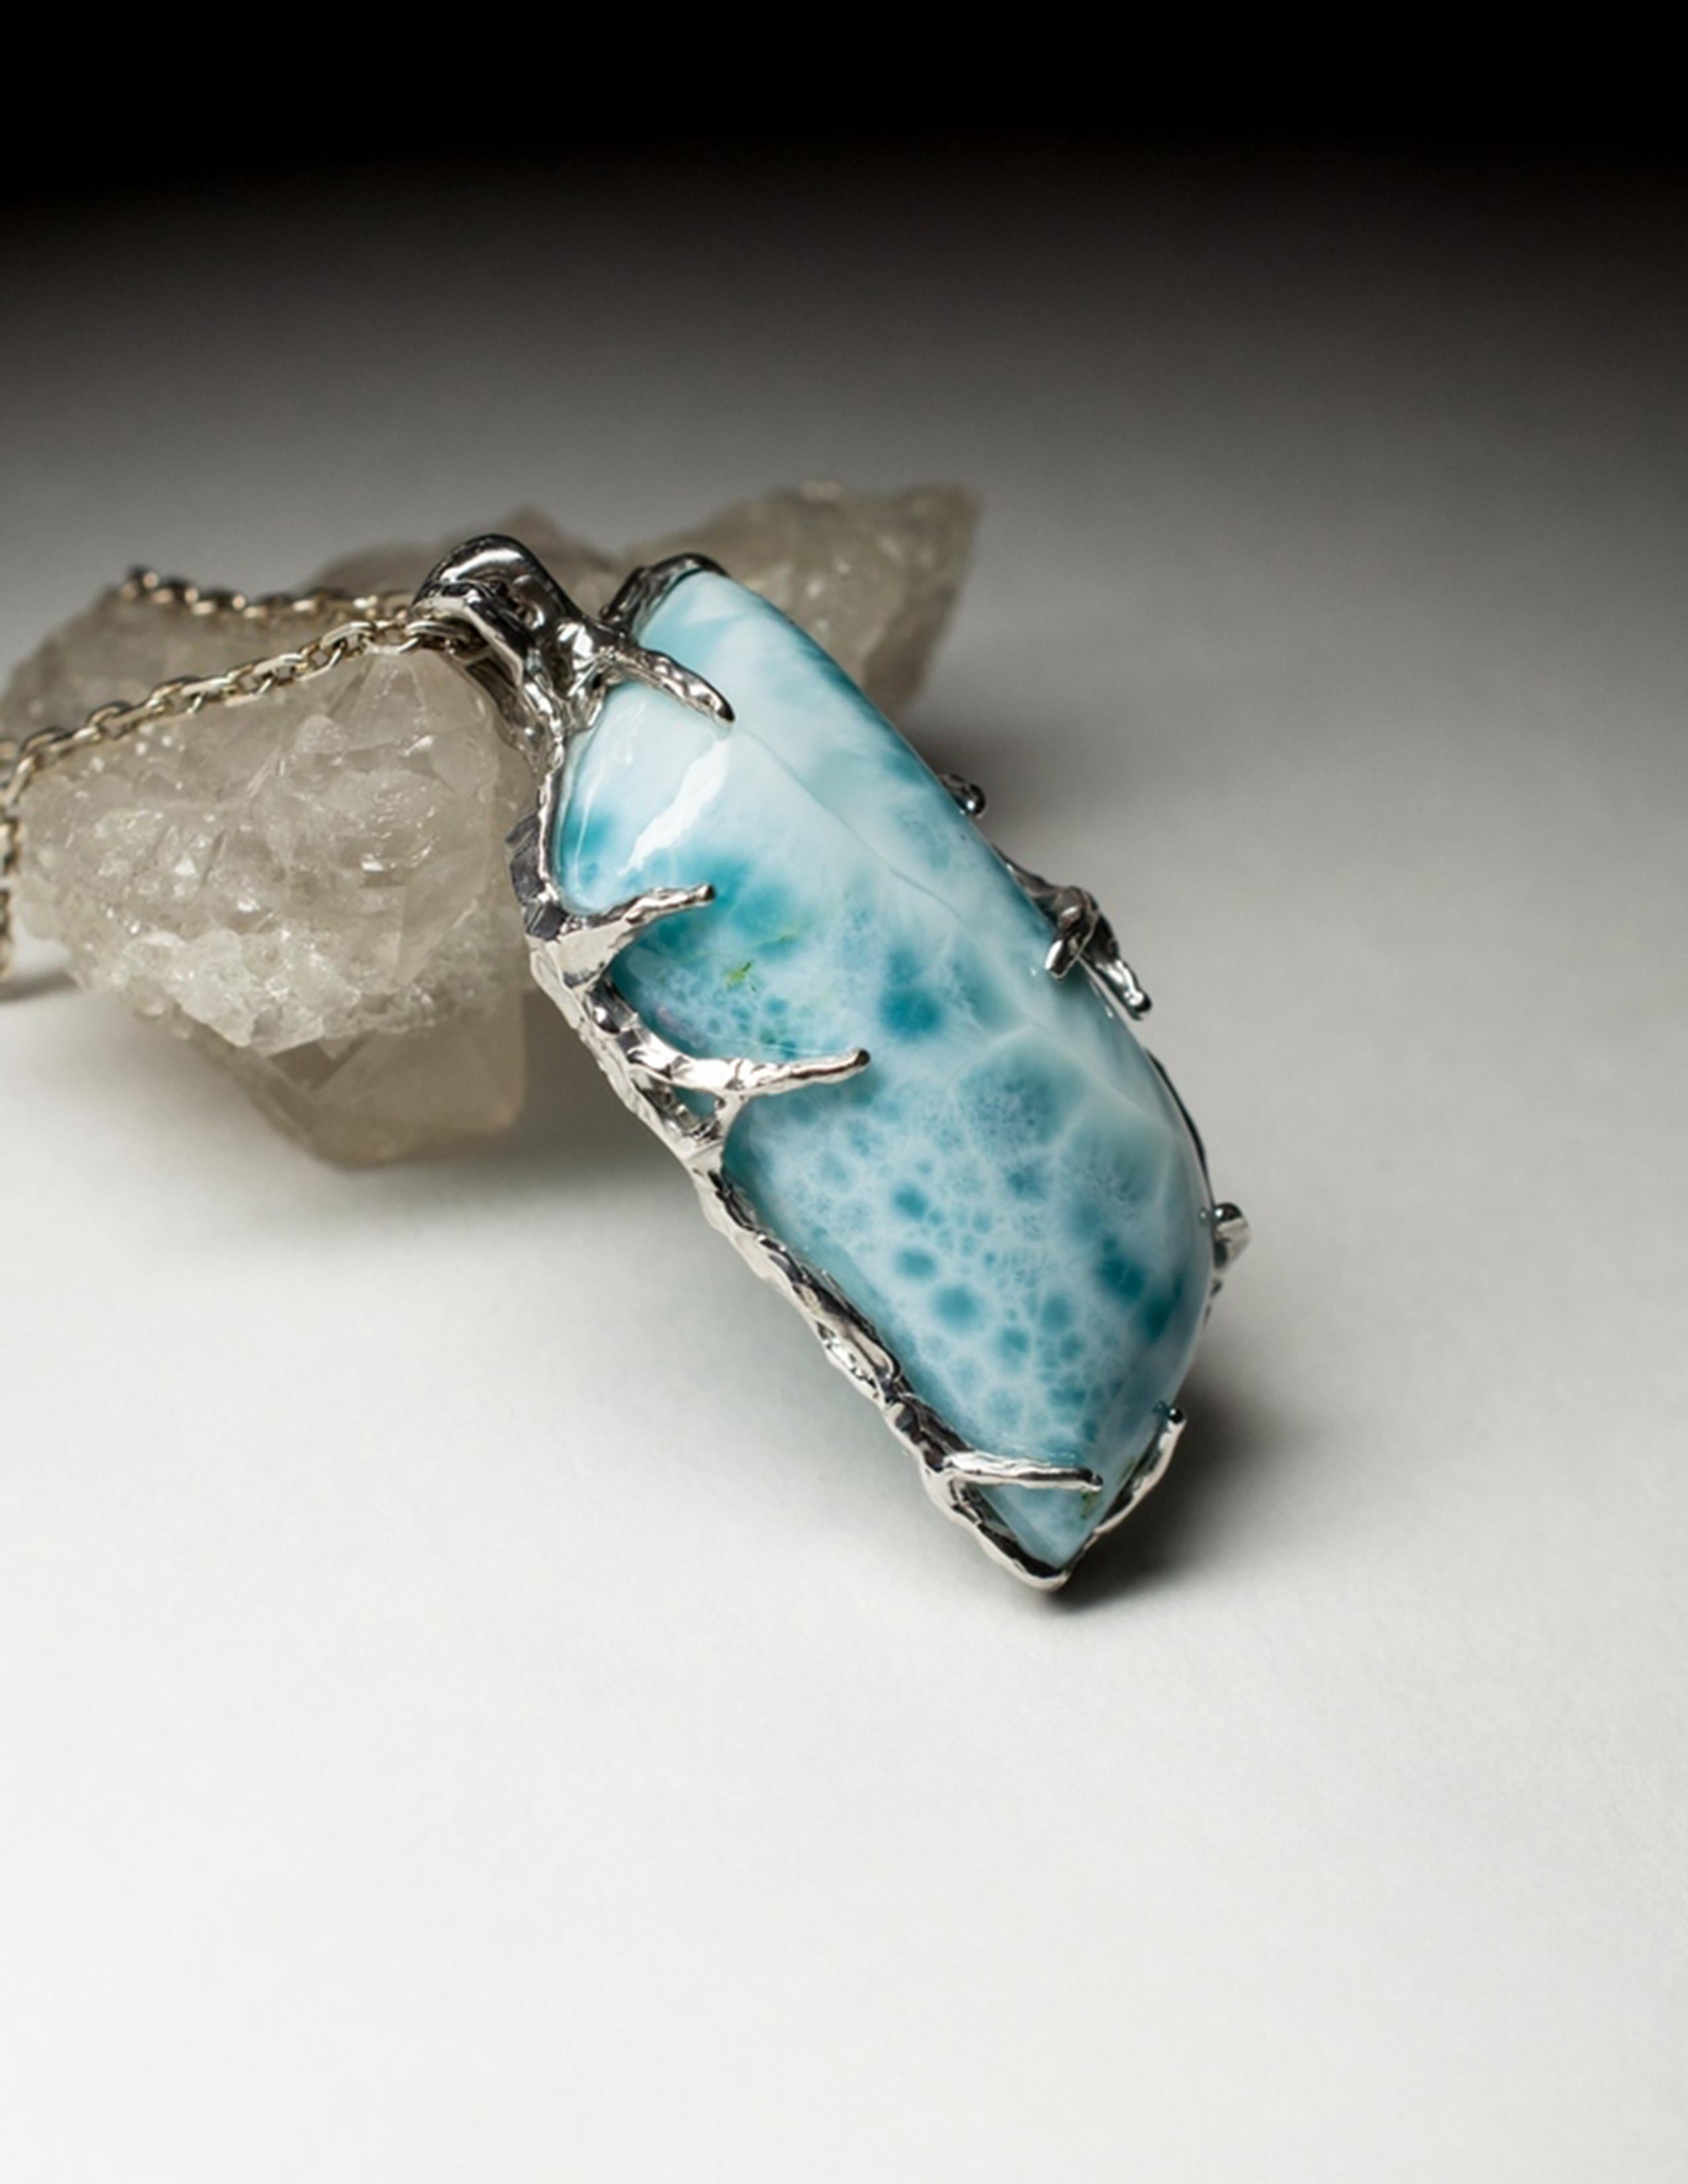 Women's or Men's Larimar Silver necklace Blue pendant special person gift wedding anniversary For Sale